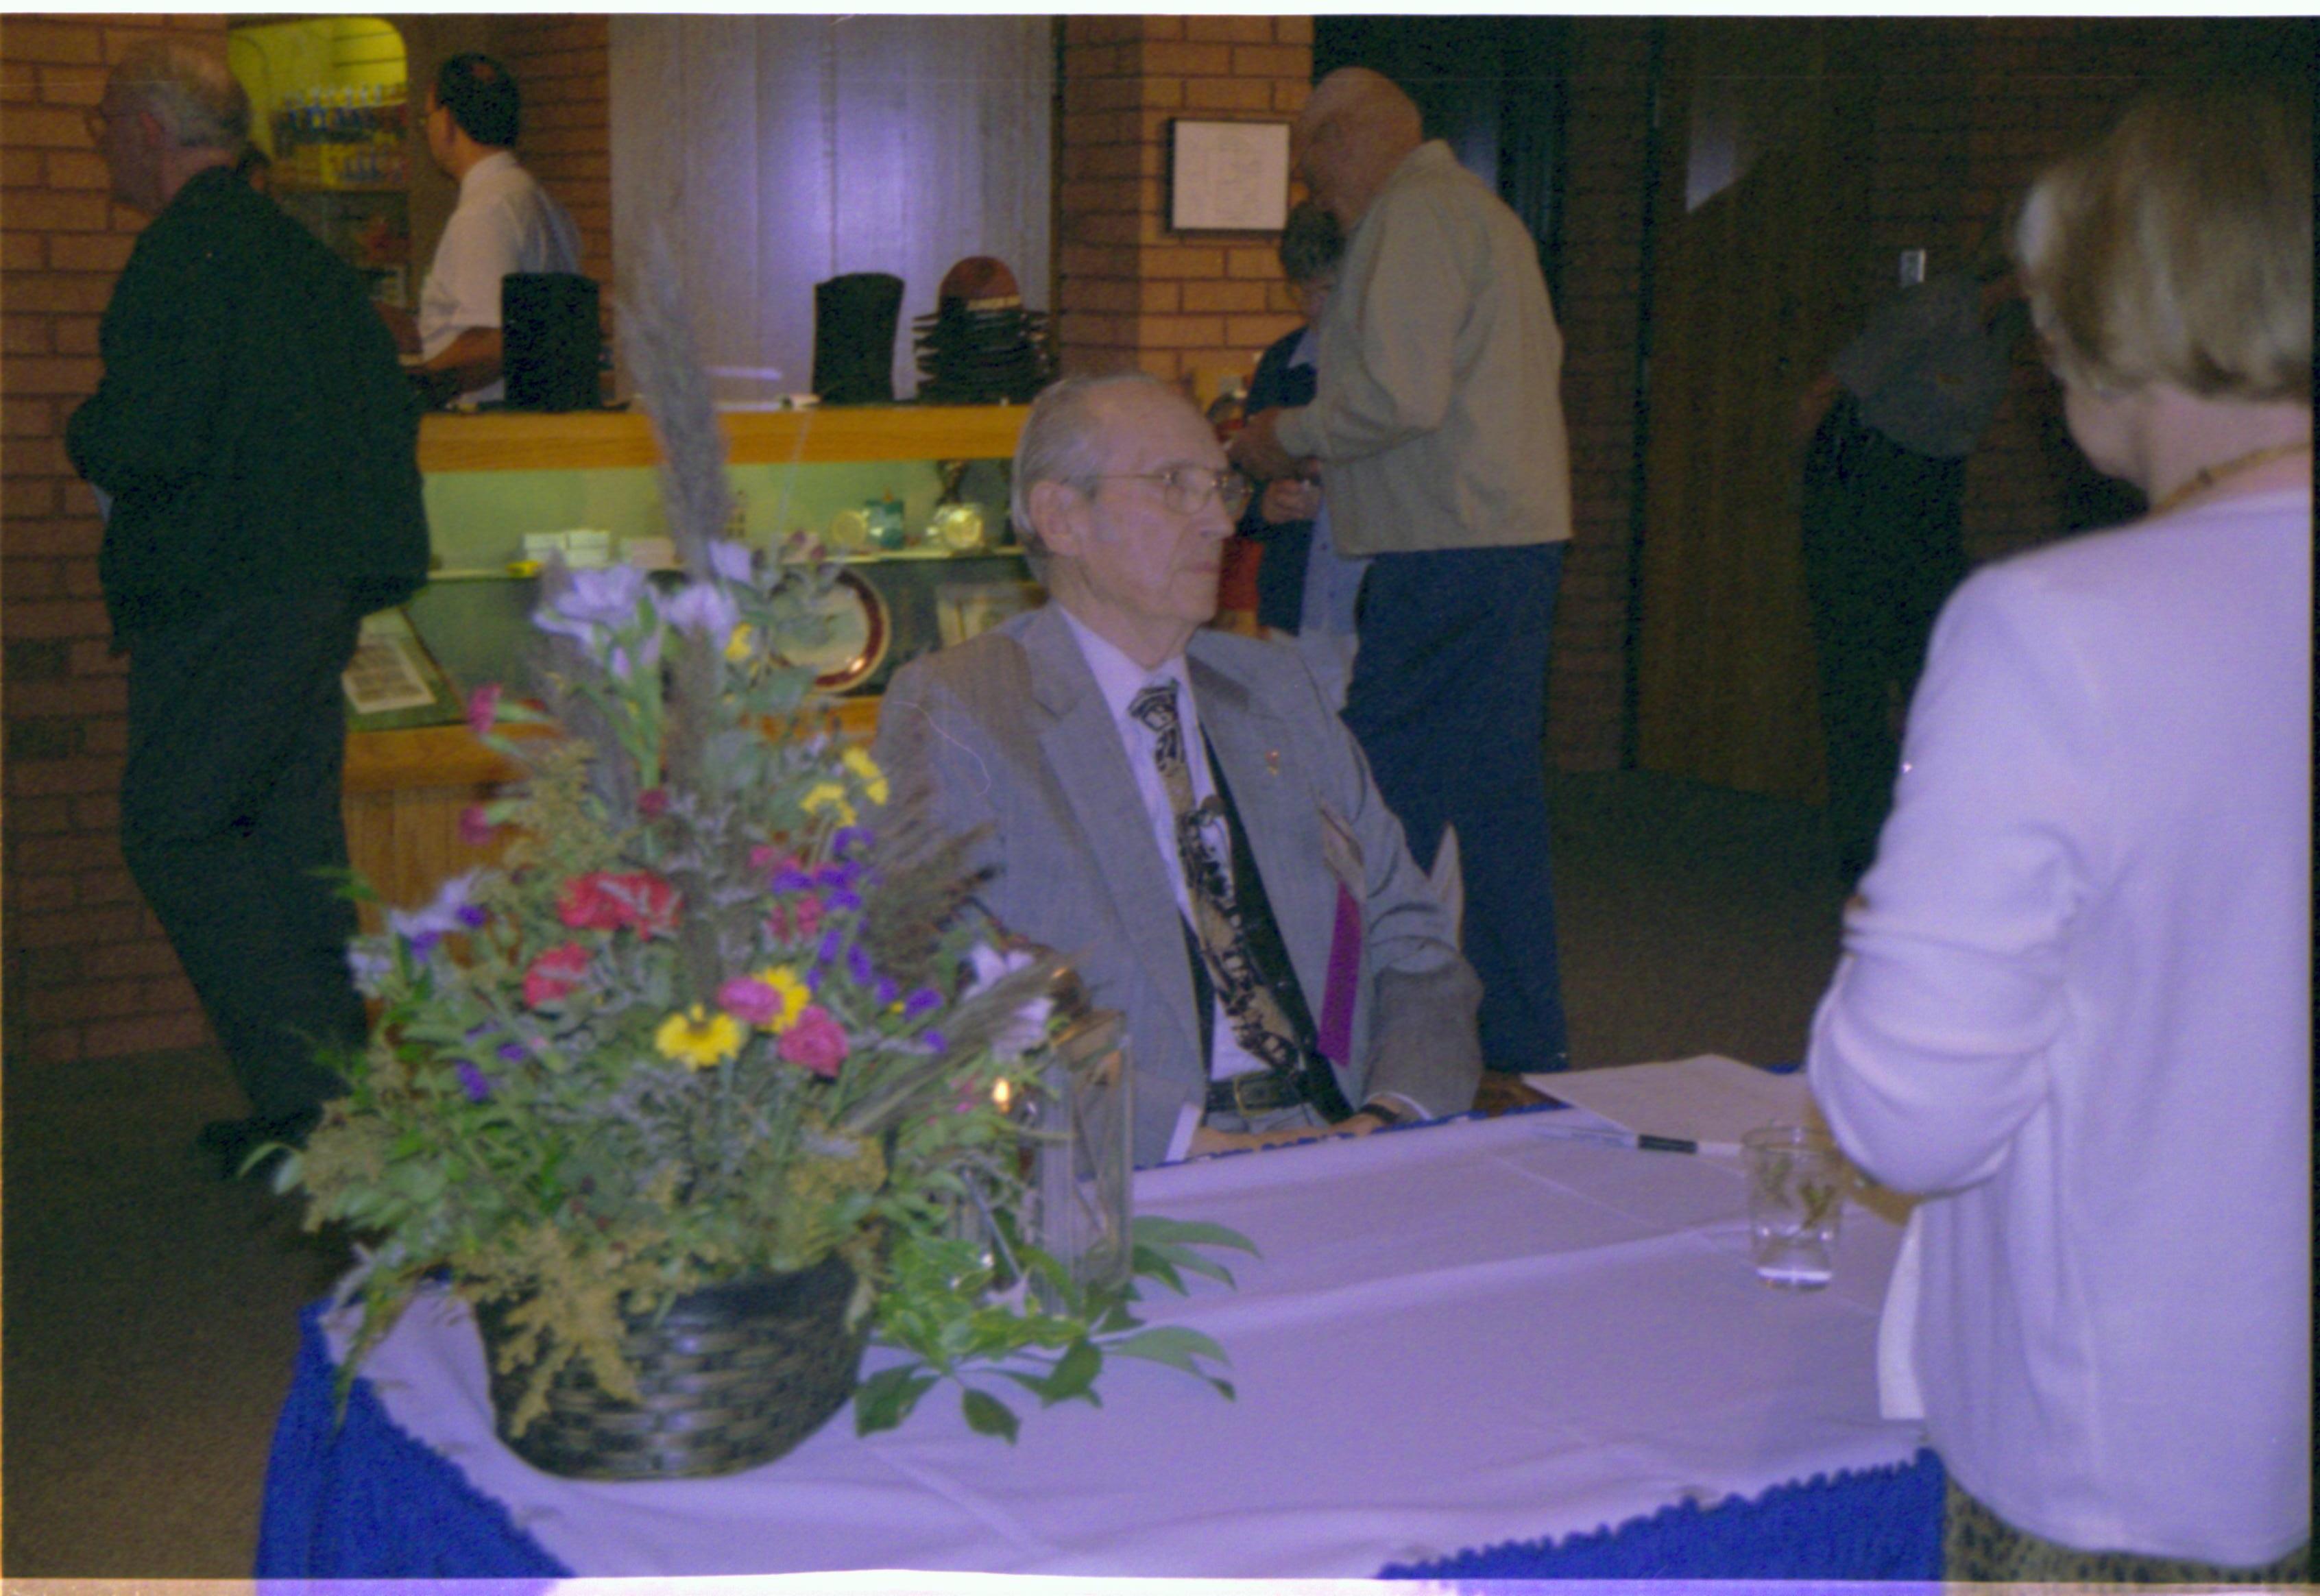 Man sitting at table with flower arrangement. Colloquium